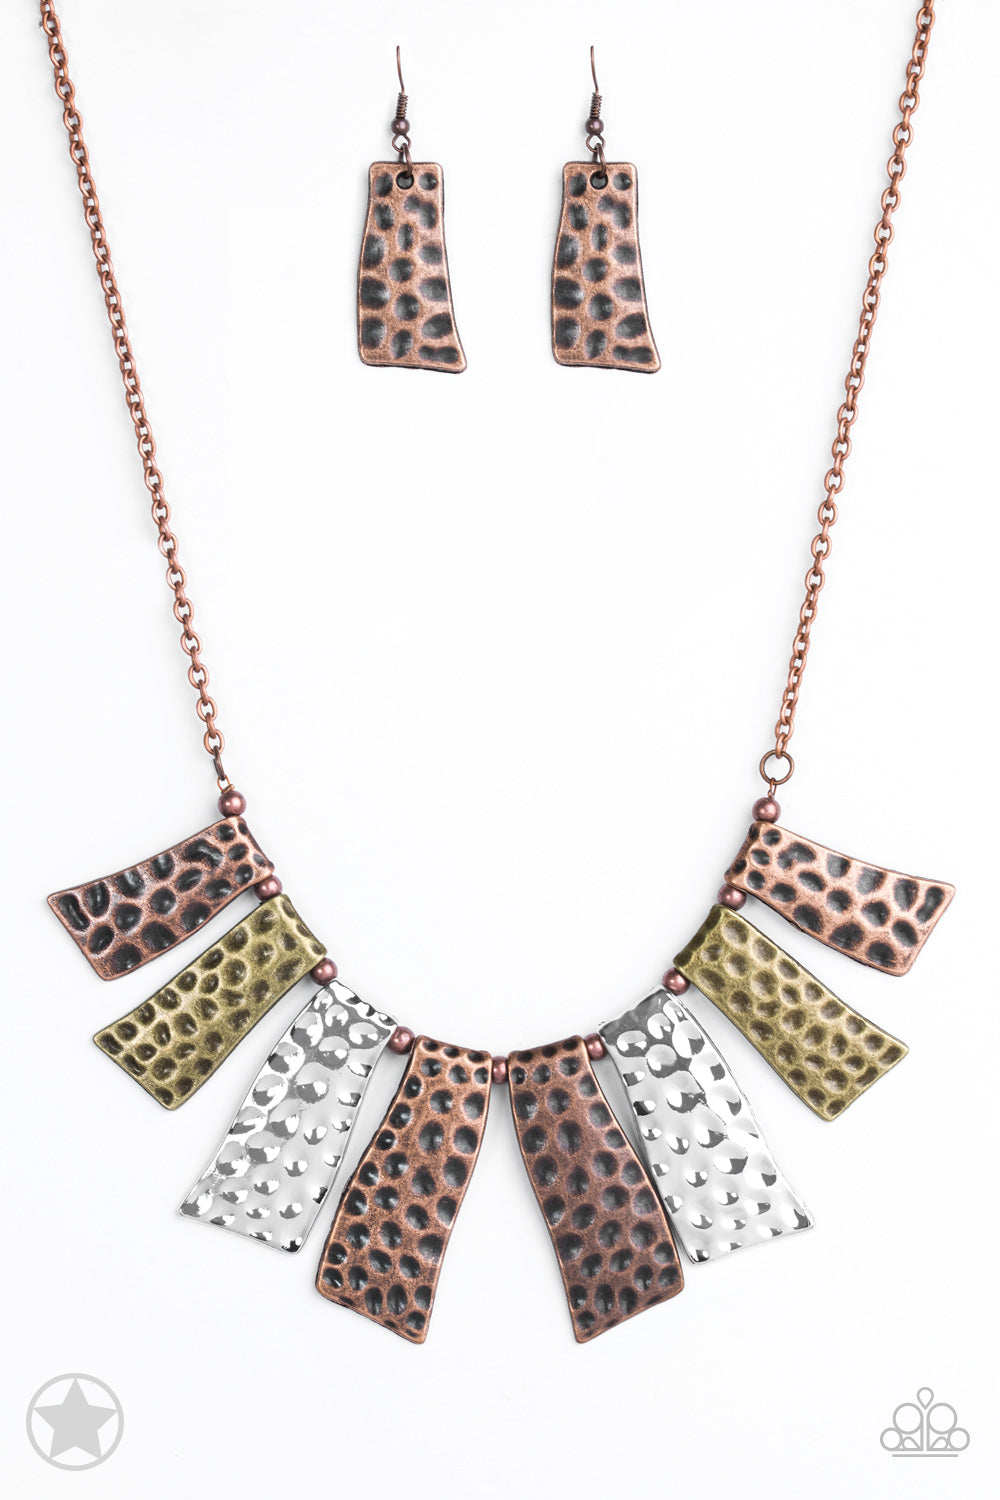 Paparazzi Accessories - A Fan of the Tribe - Multi Necklace - Alies Bling Bar